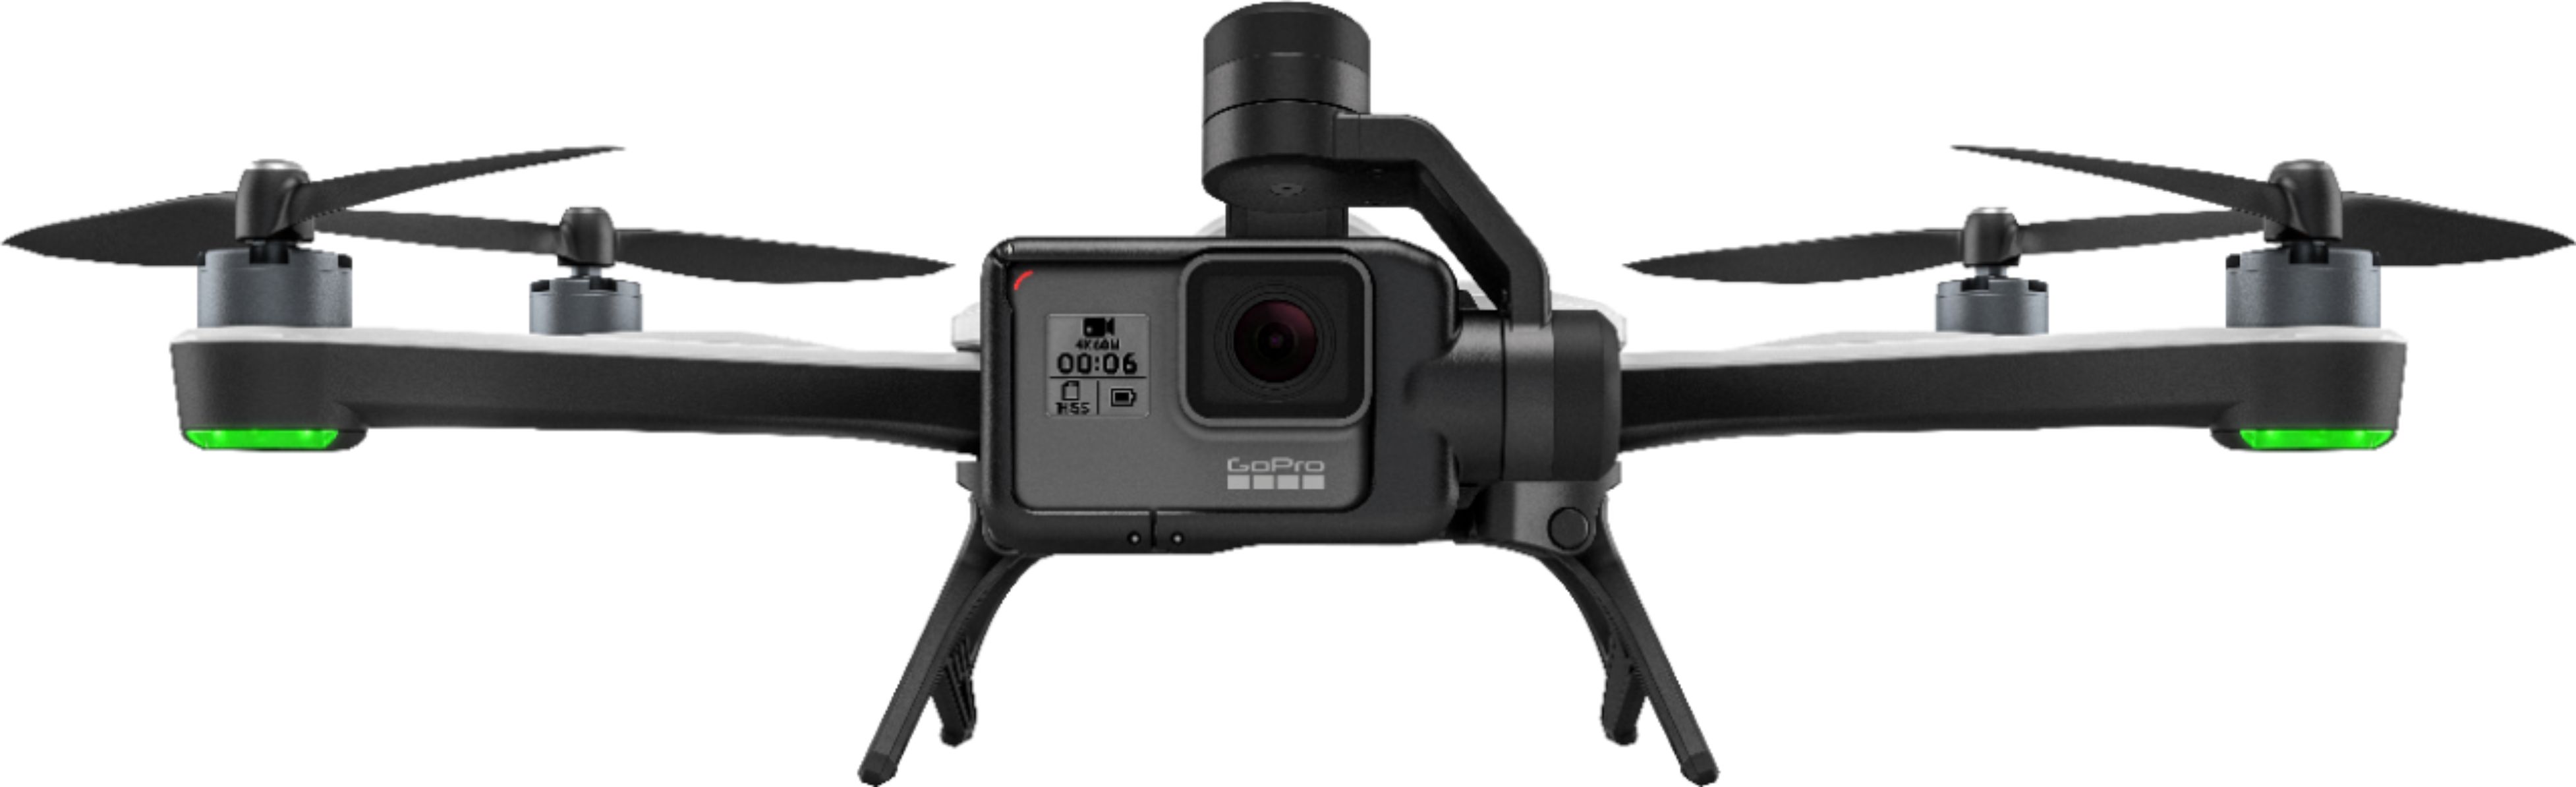 Best GoPro Karma Quadcopter with Black